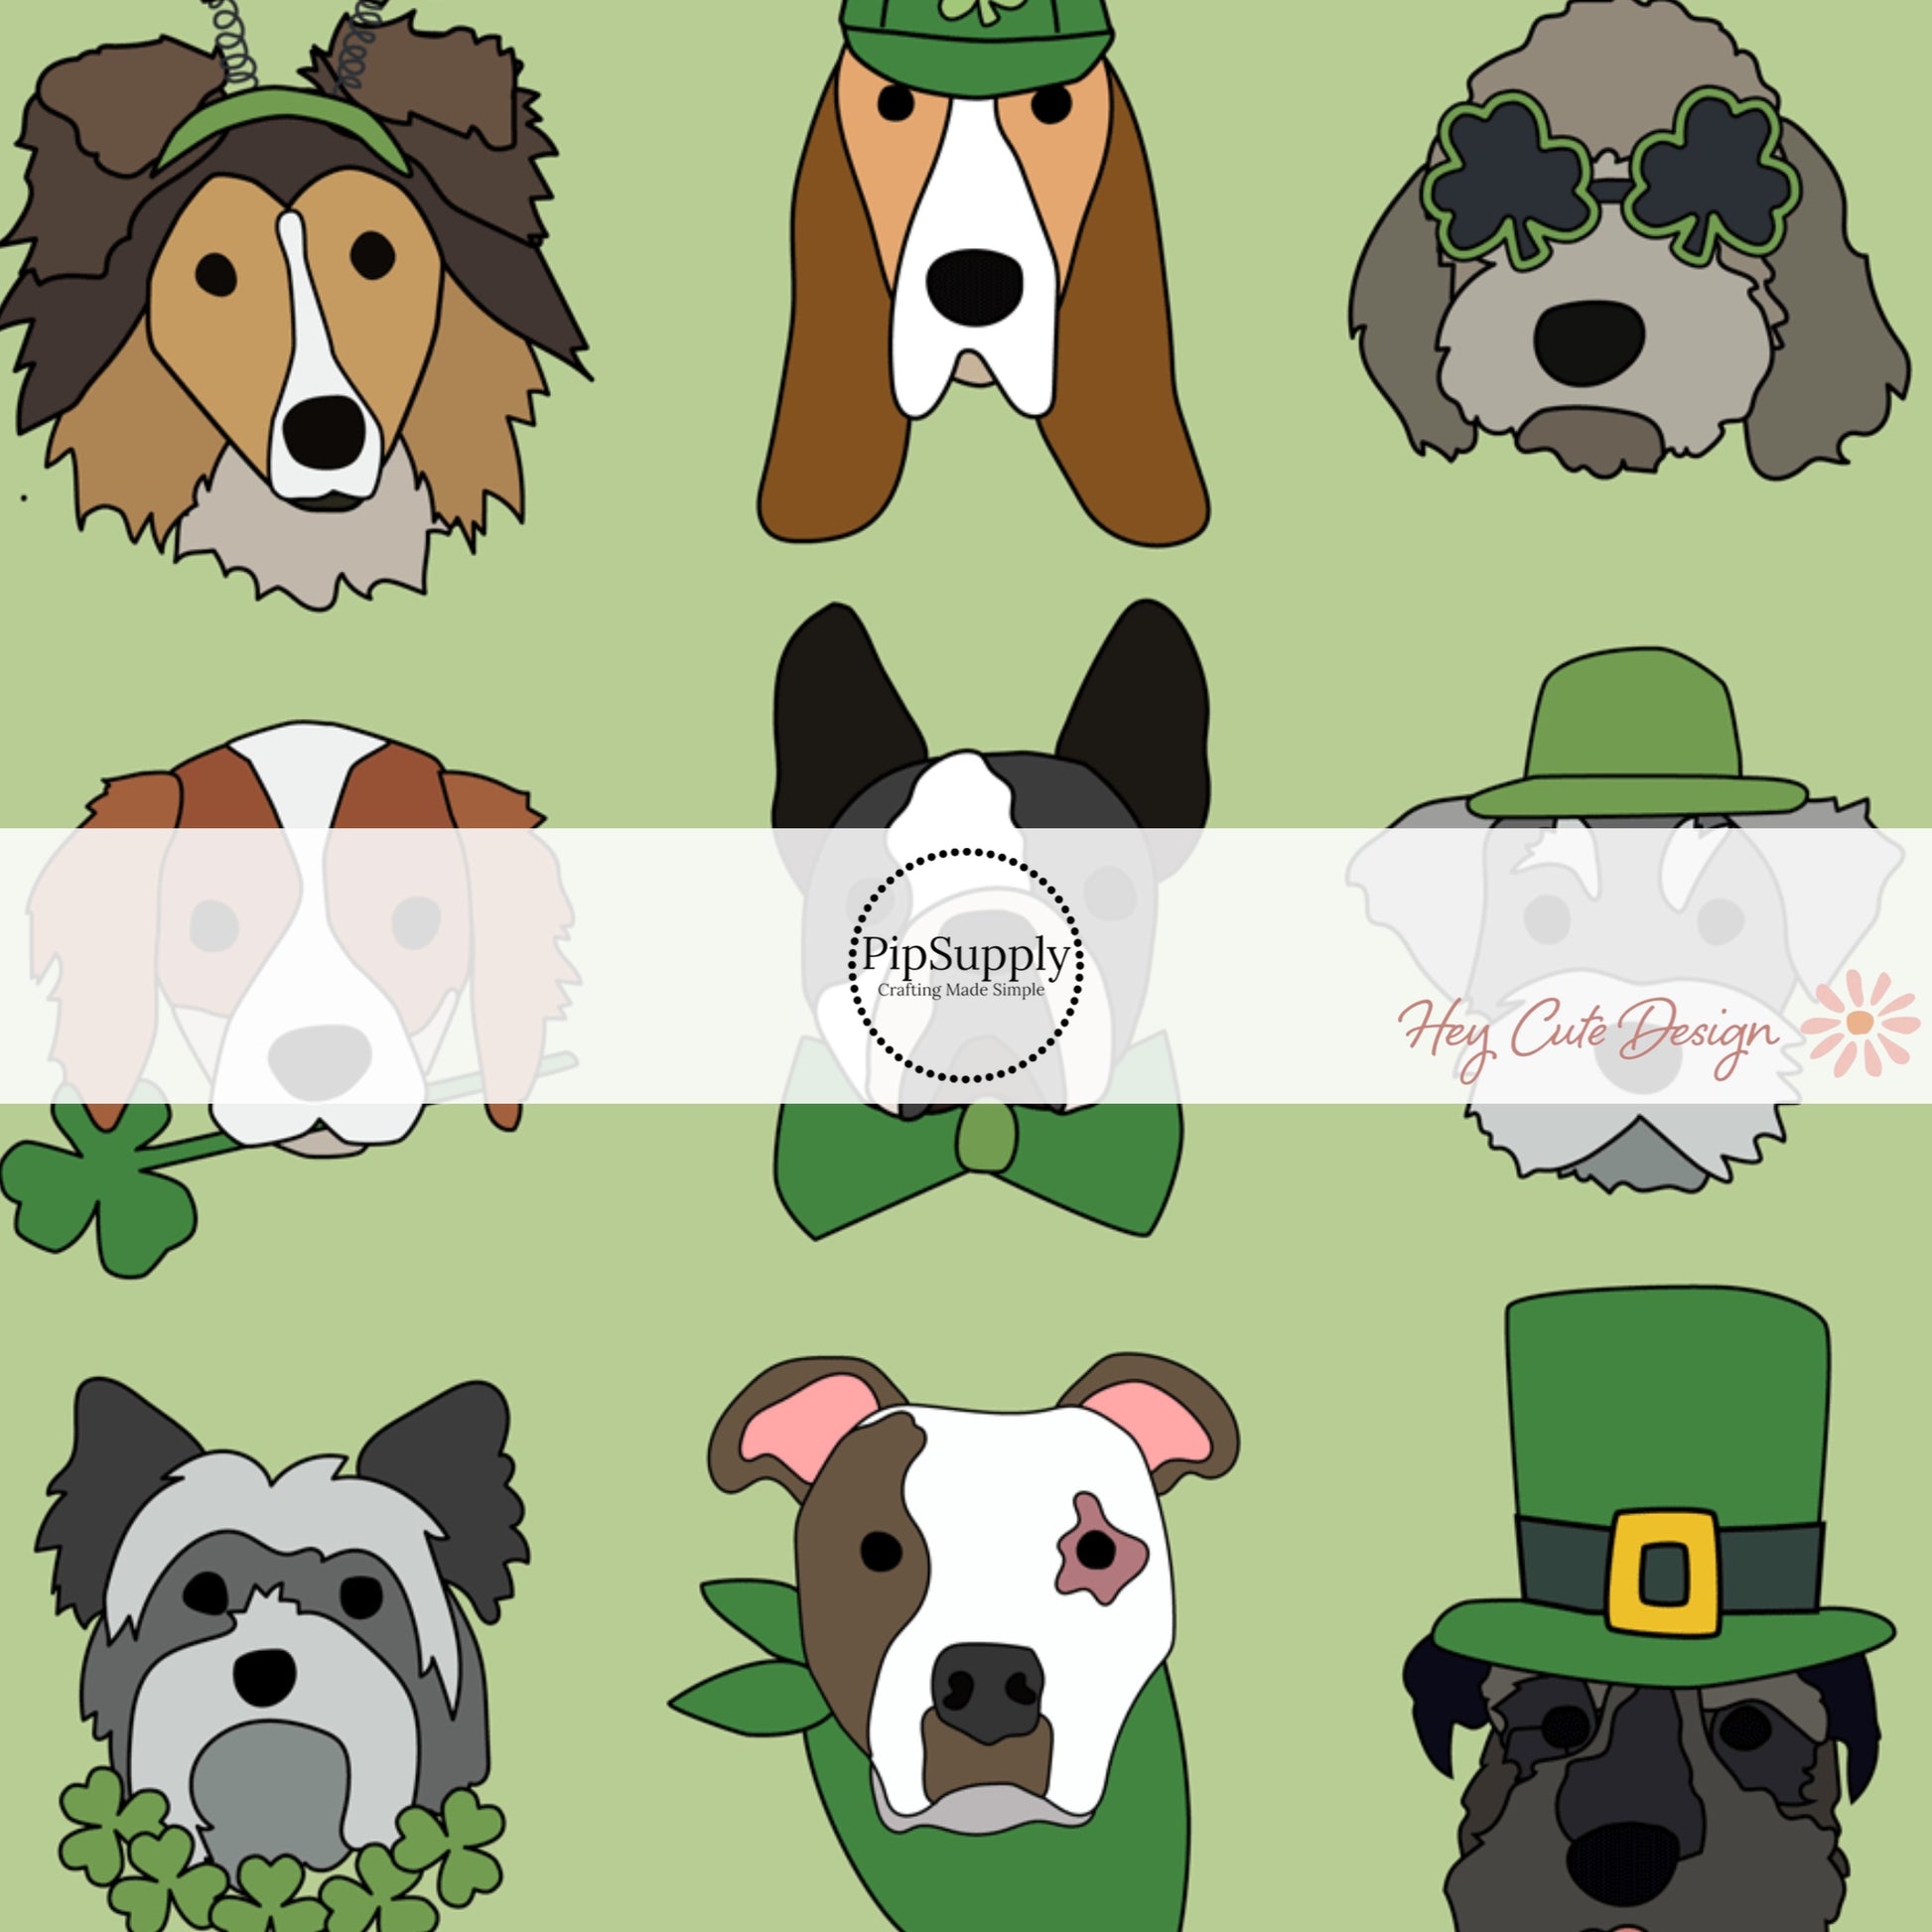 Gray puppy with clover sunglasses, brown puppy with clover headband, and multiple puppies with green st patricks day hats on a green bow strip